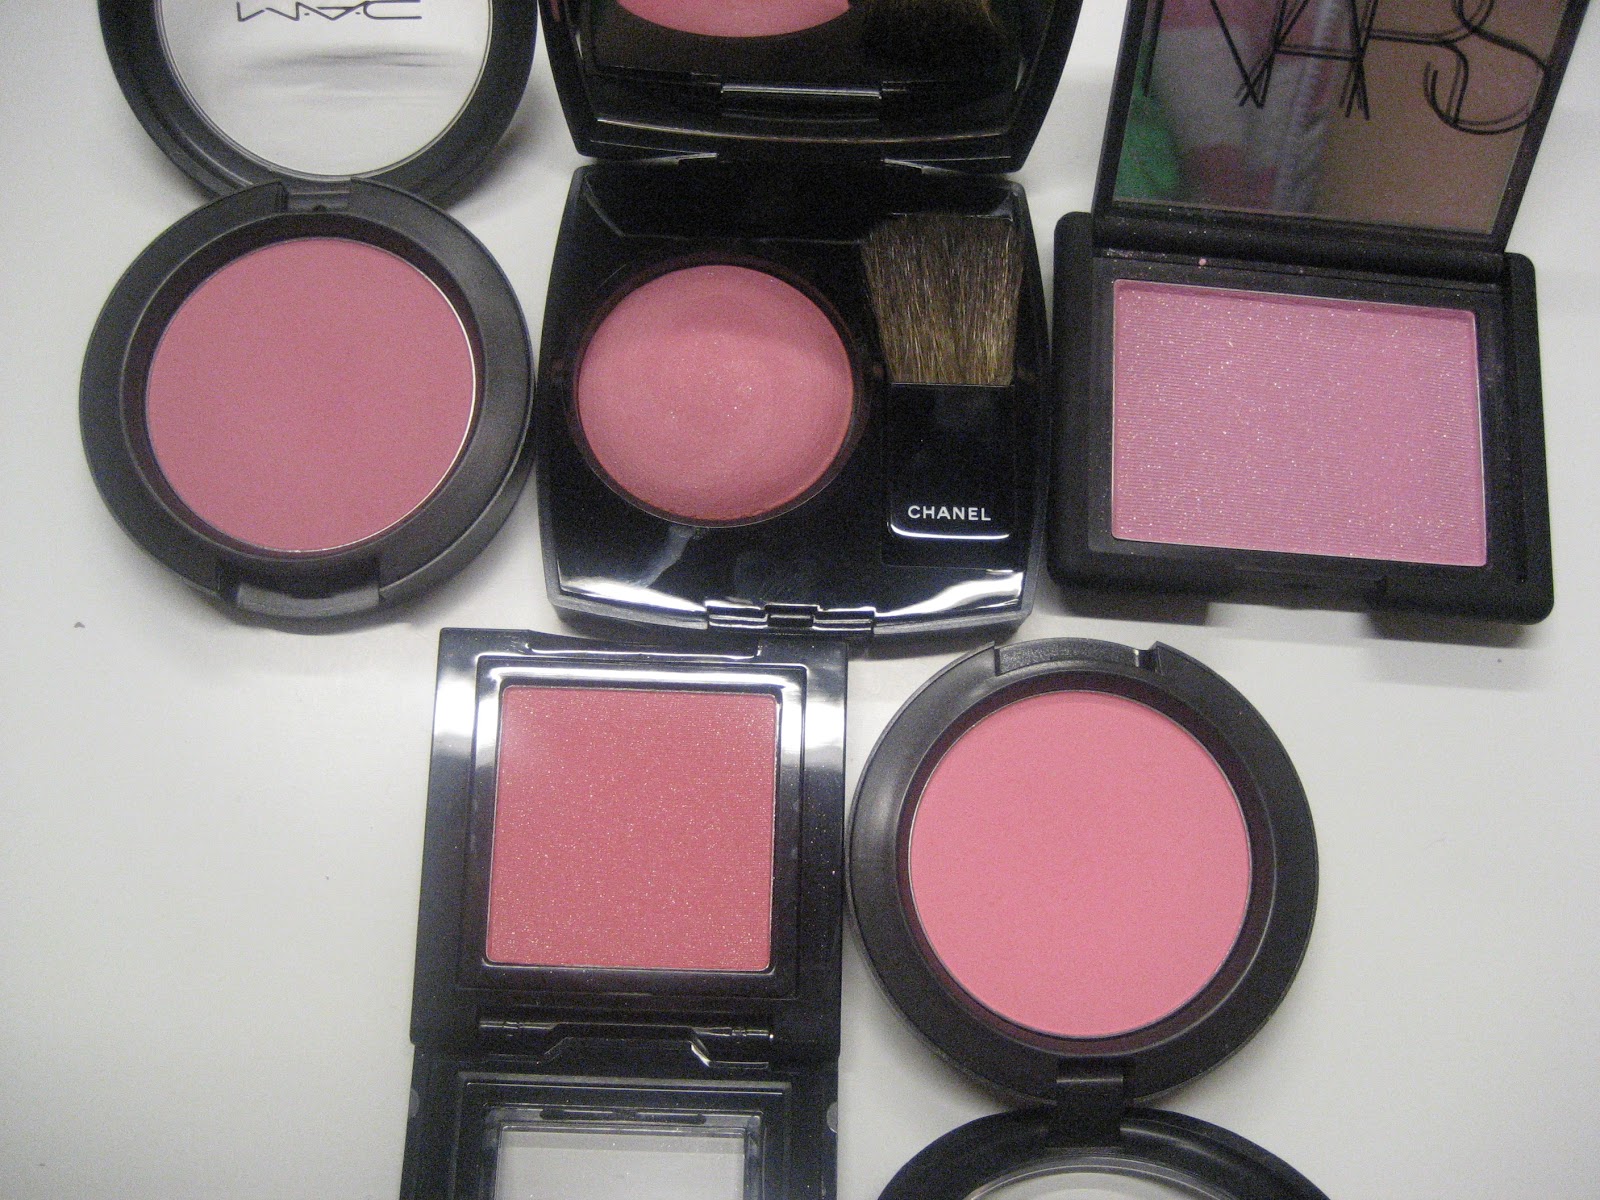 Chanel Pink Explosion Joues Contraste Blush Review & Swatches